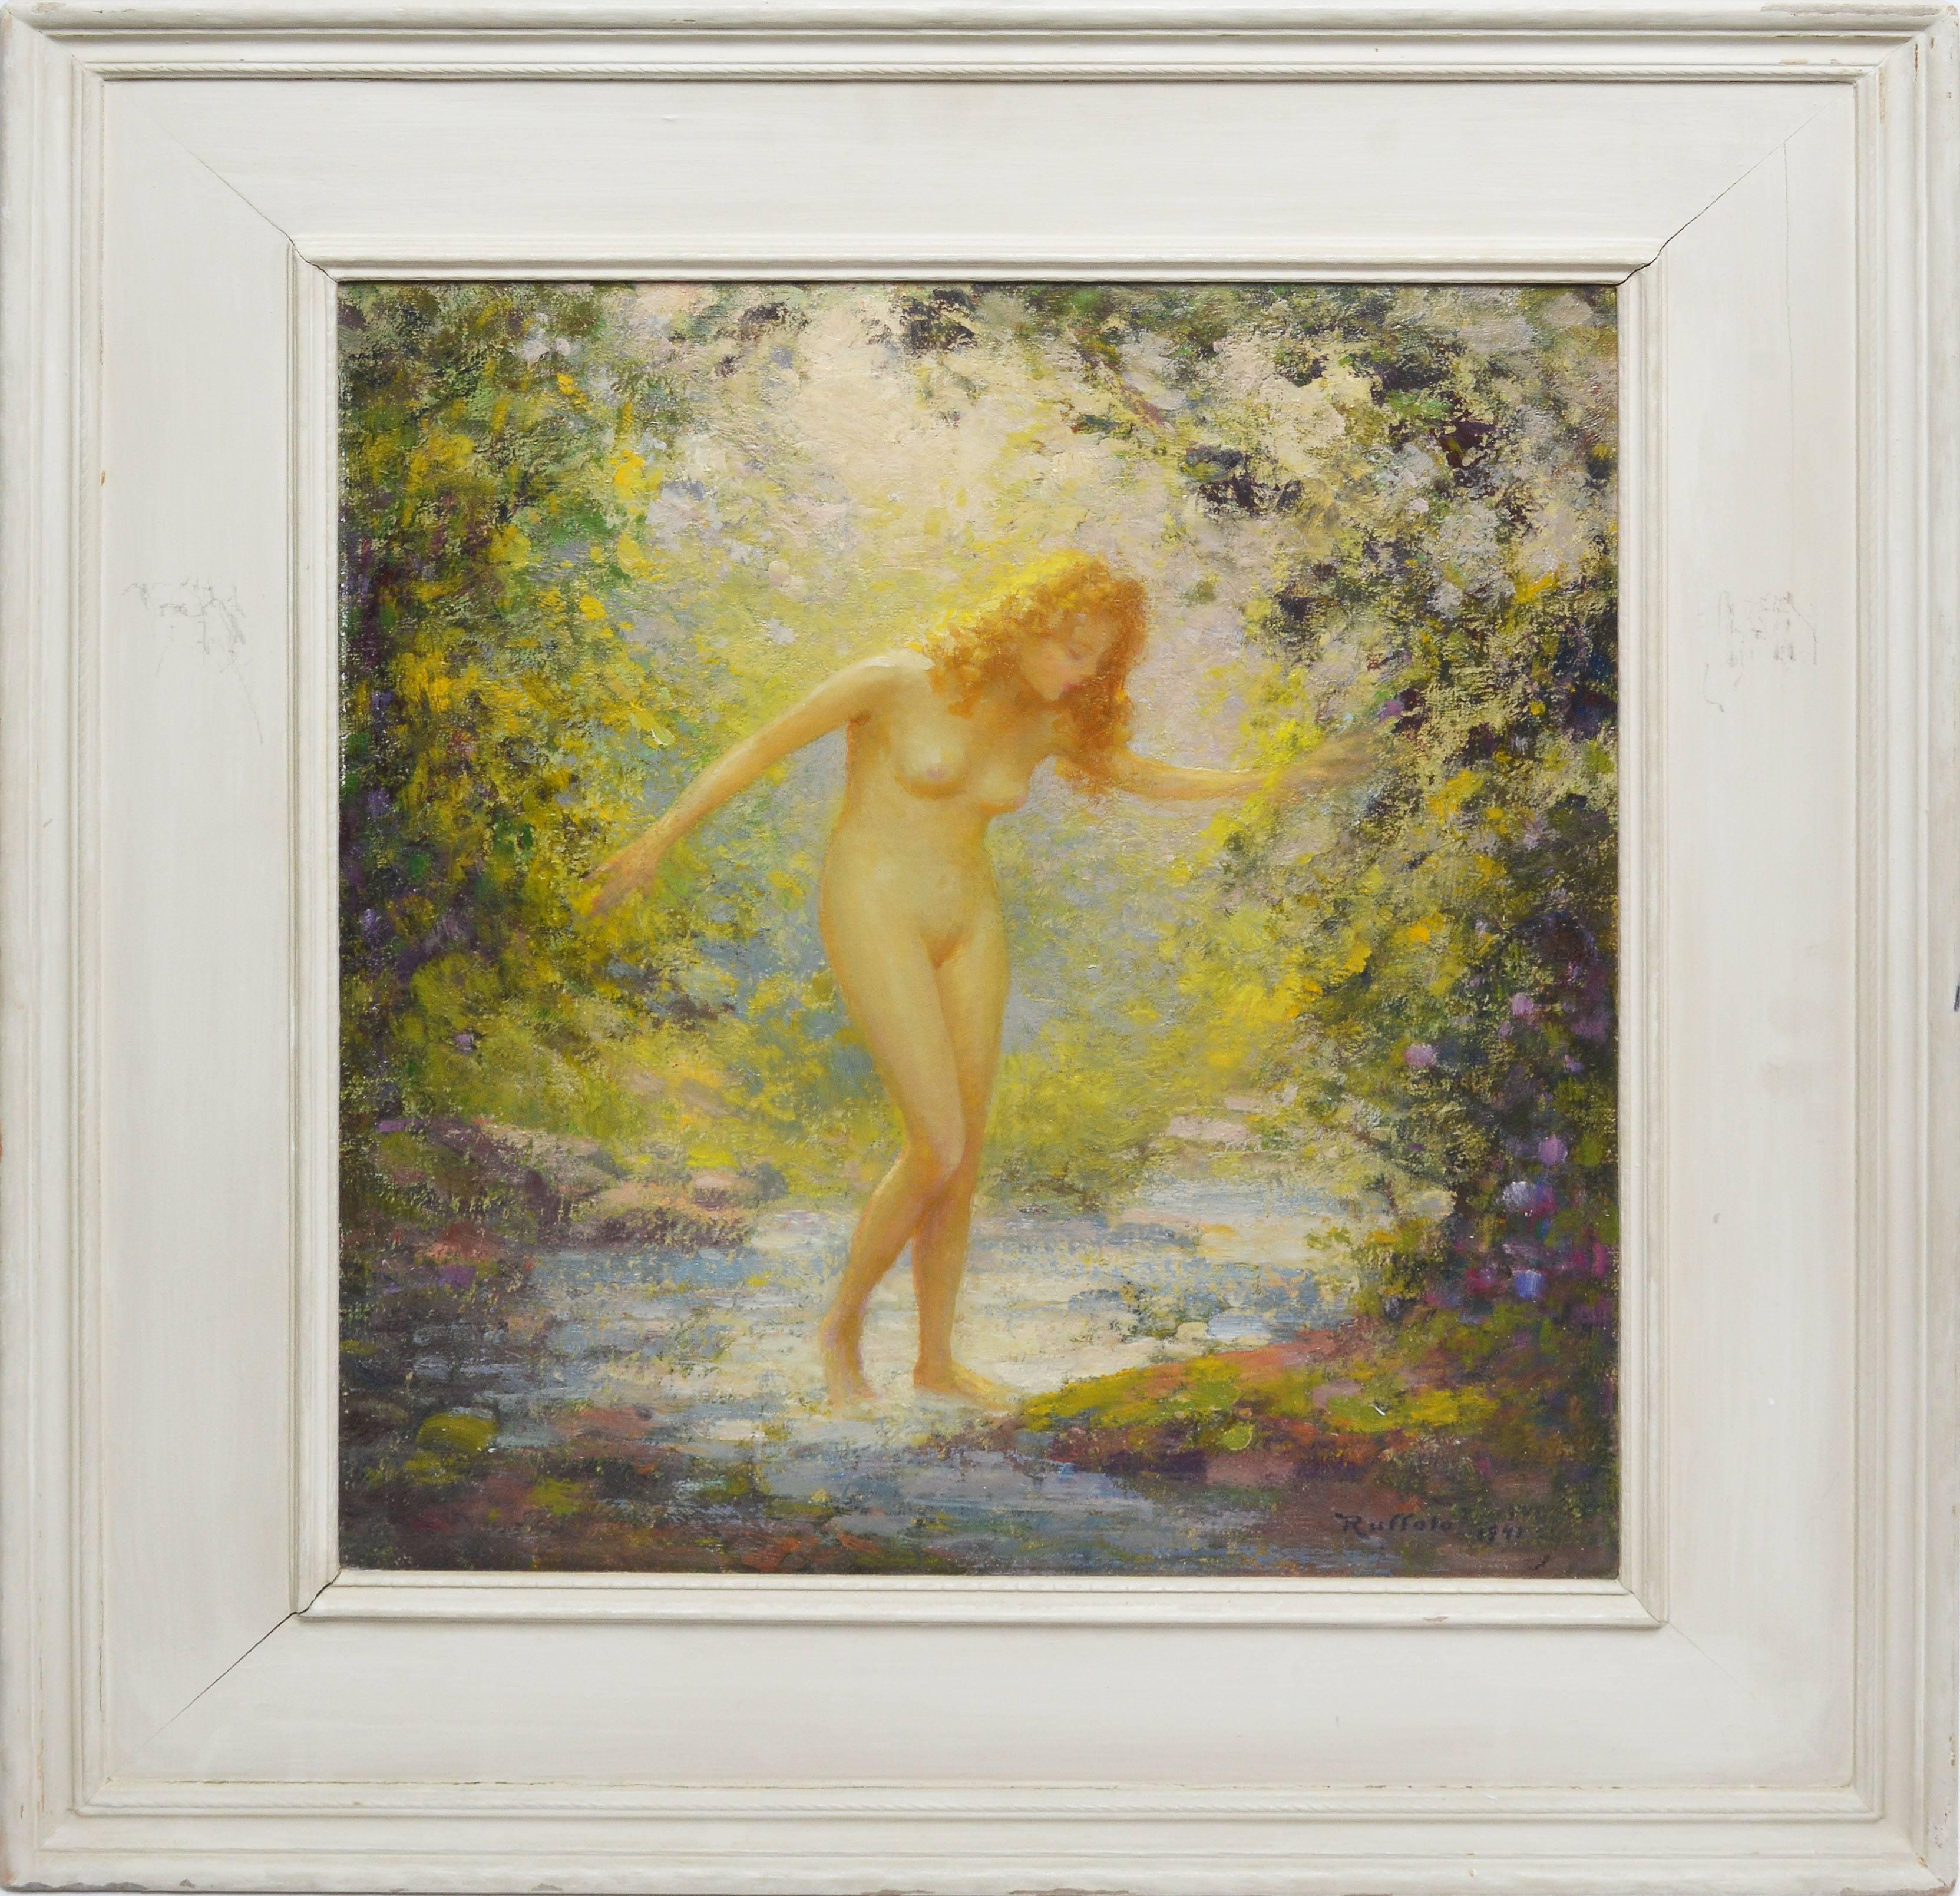 Gaspare J. Ruffolo Nude Painting - "The Cool Water", Nude Woman in the Forest by Gaspare J Ruffolo